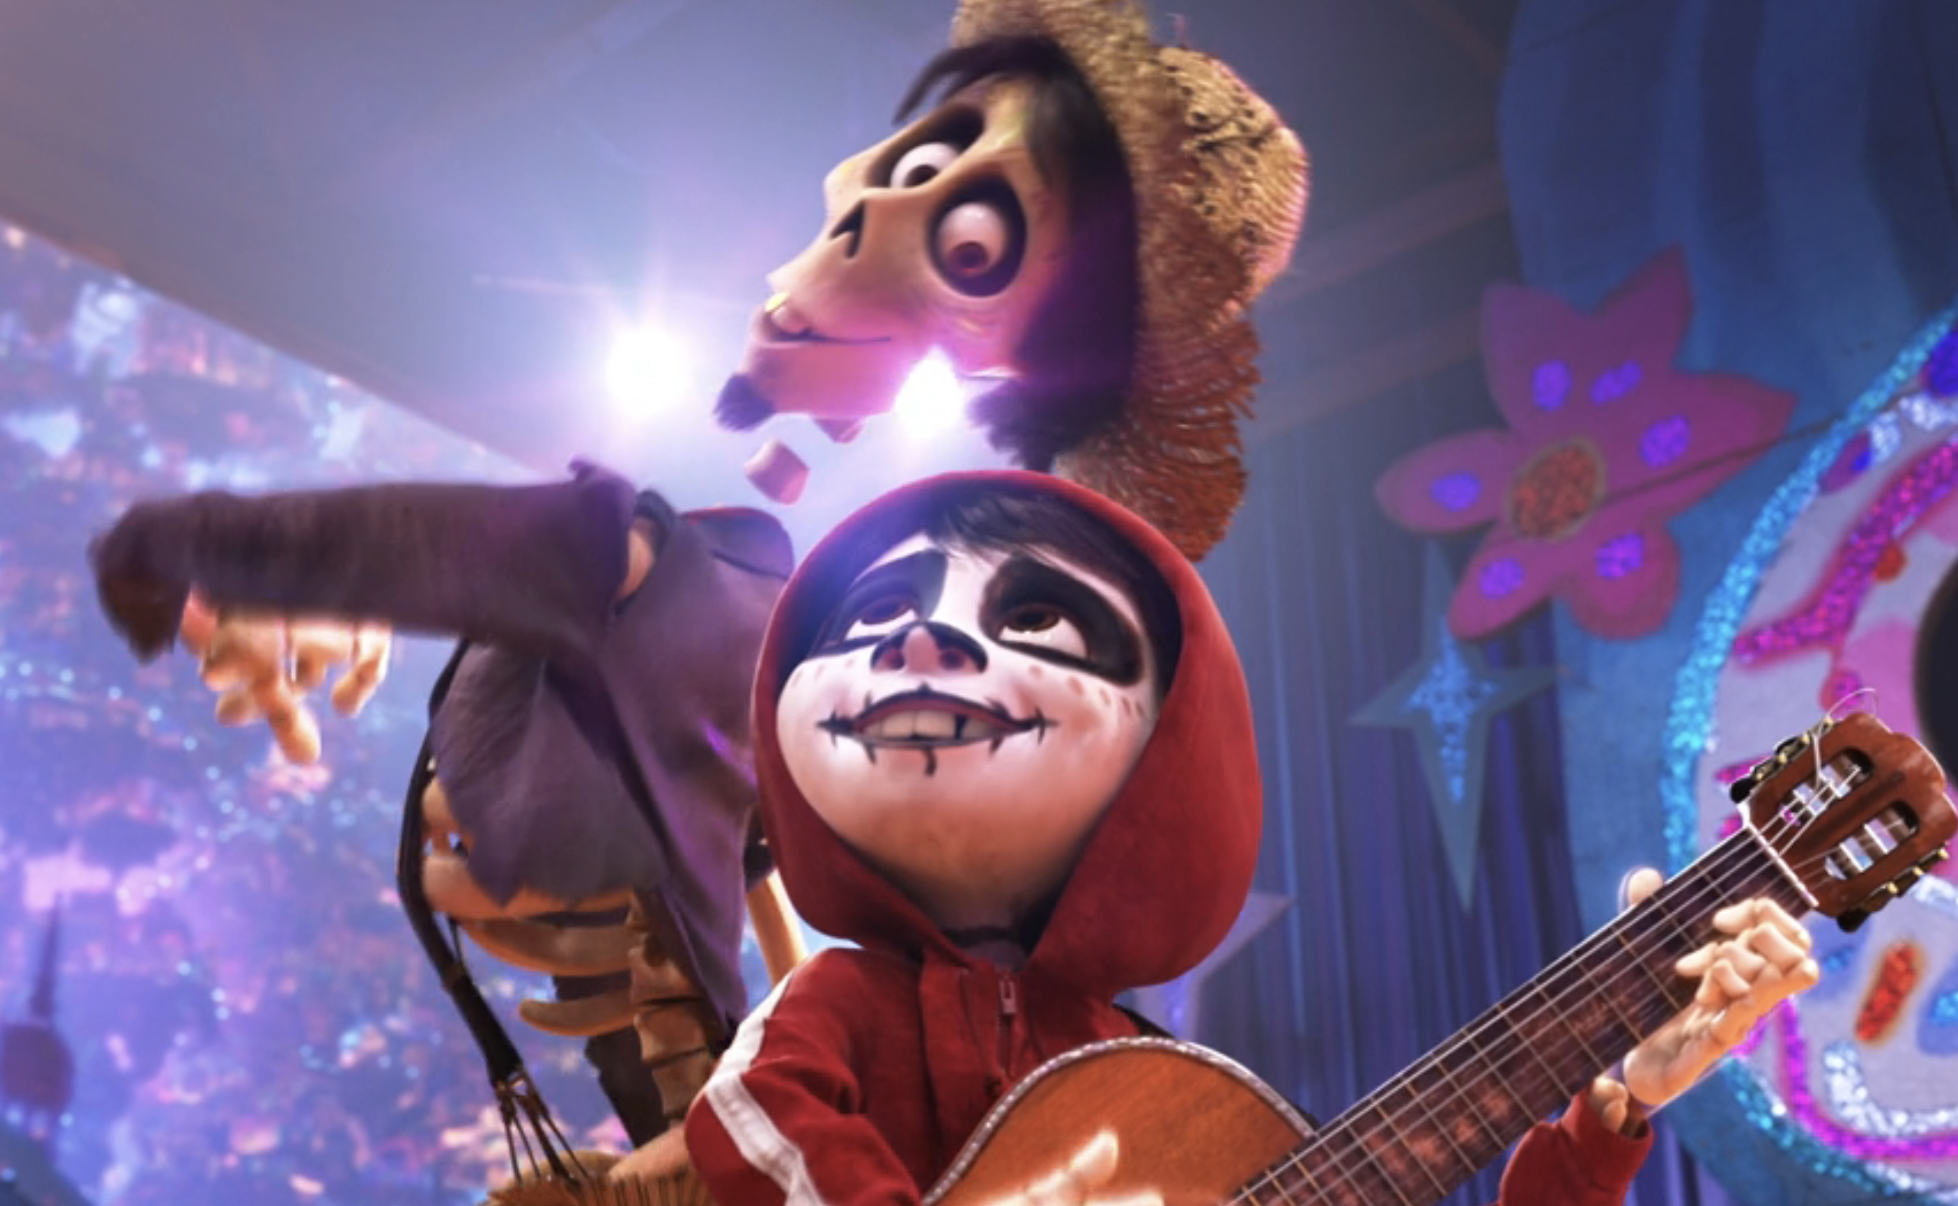 Screenshot from &quot;Coco&quot;